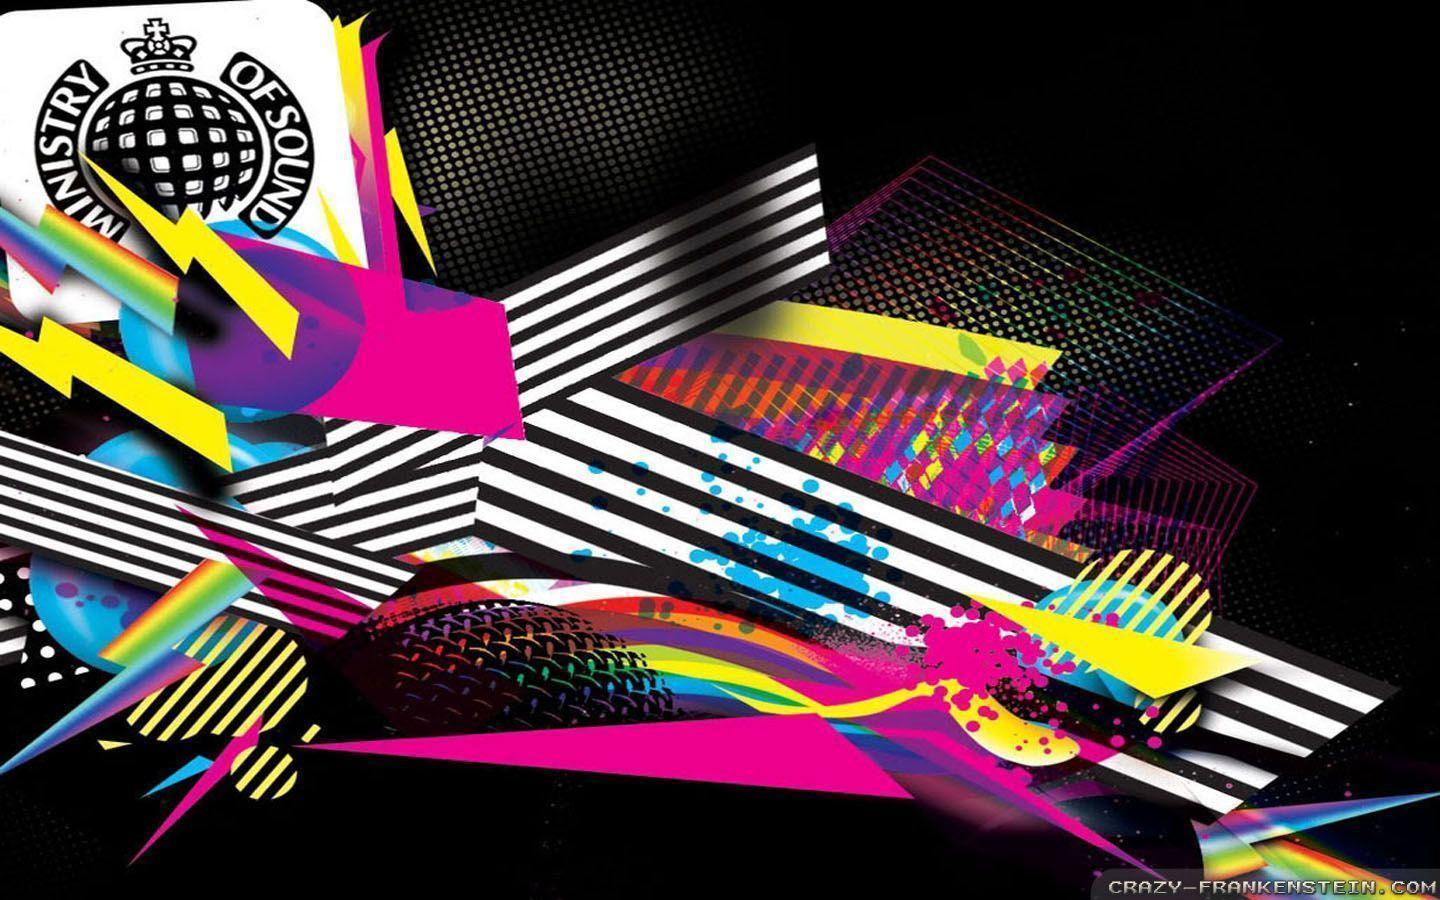 Electro Music Wallpaper Image & Picture